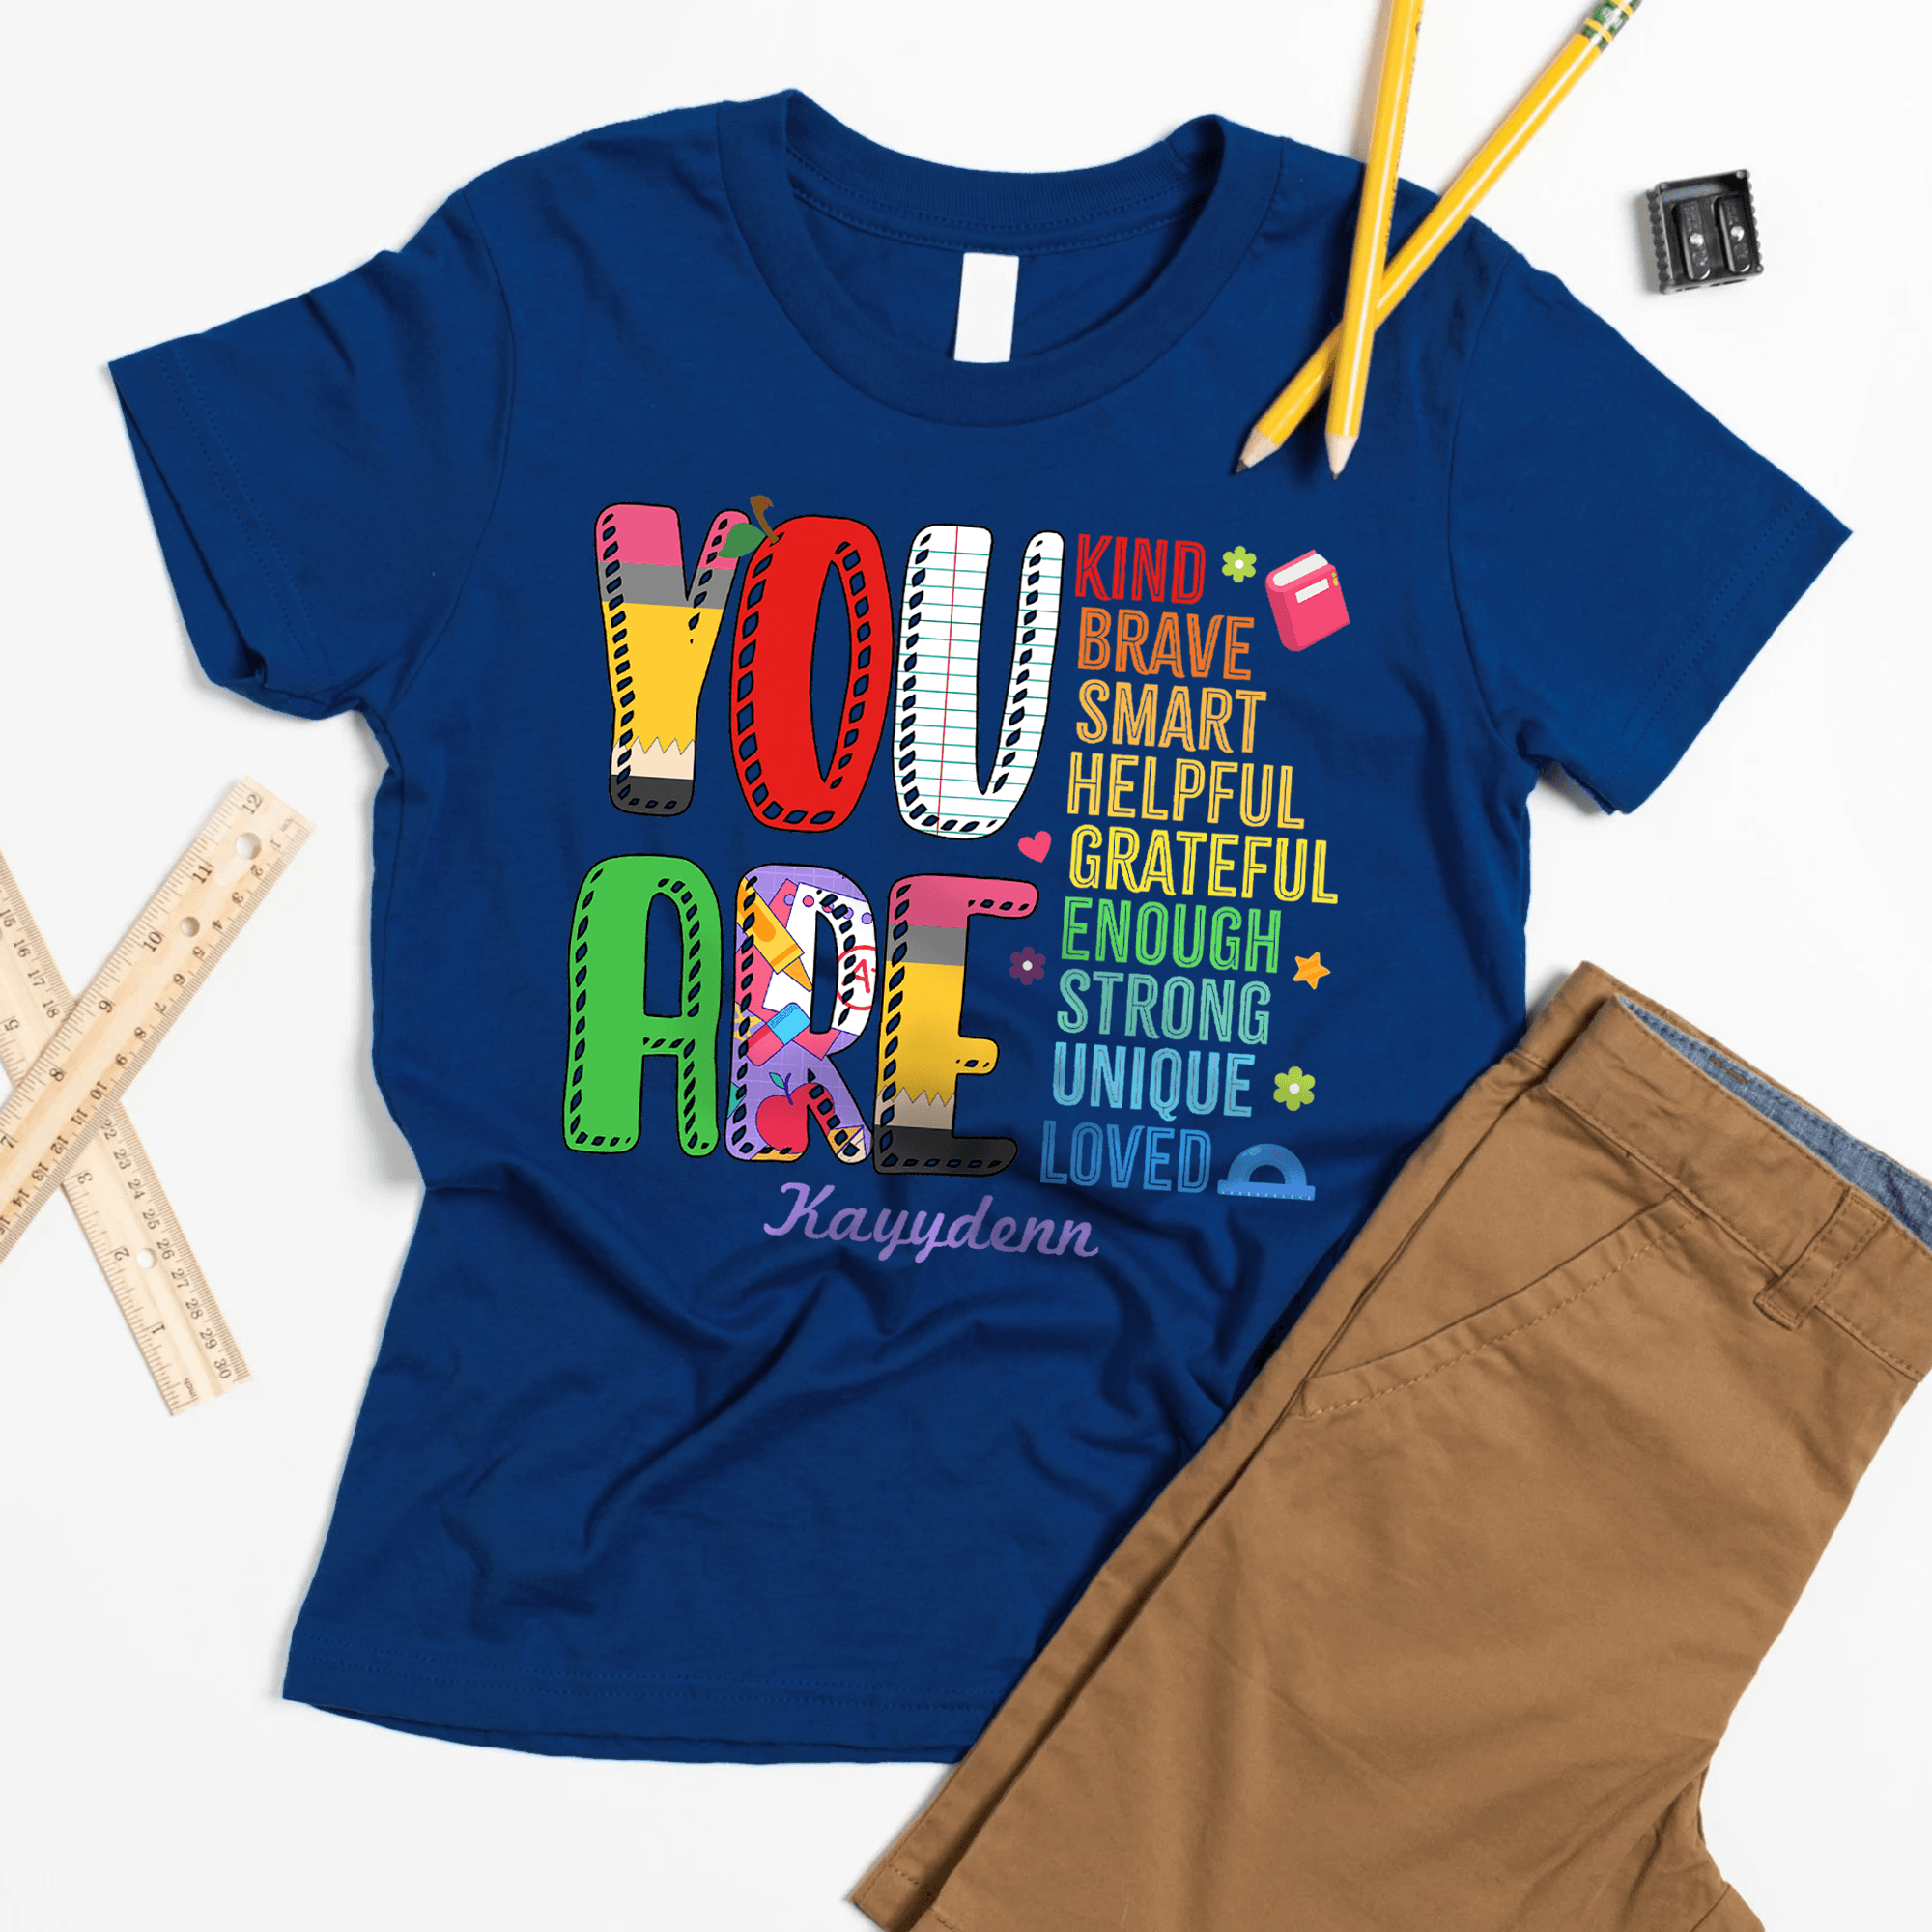 YOU ARE LOVED - Kids Back to School, First Day Of School Kid - Personalized Custom Youth Shirt - Back To School, First Day Of School Gift For Student, Kids, Son, Daughter